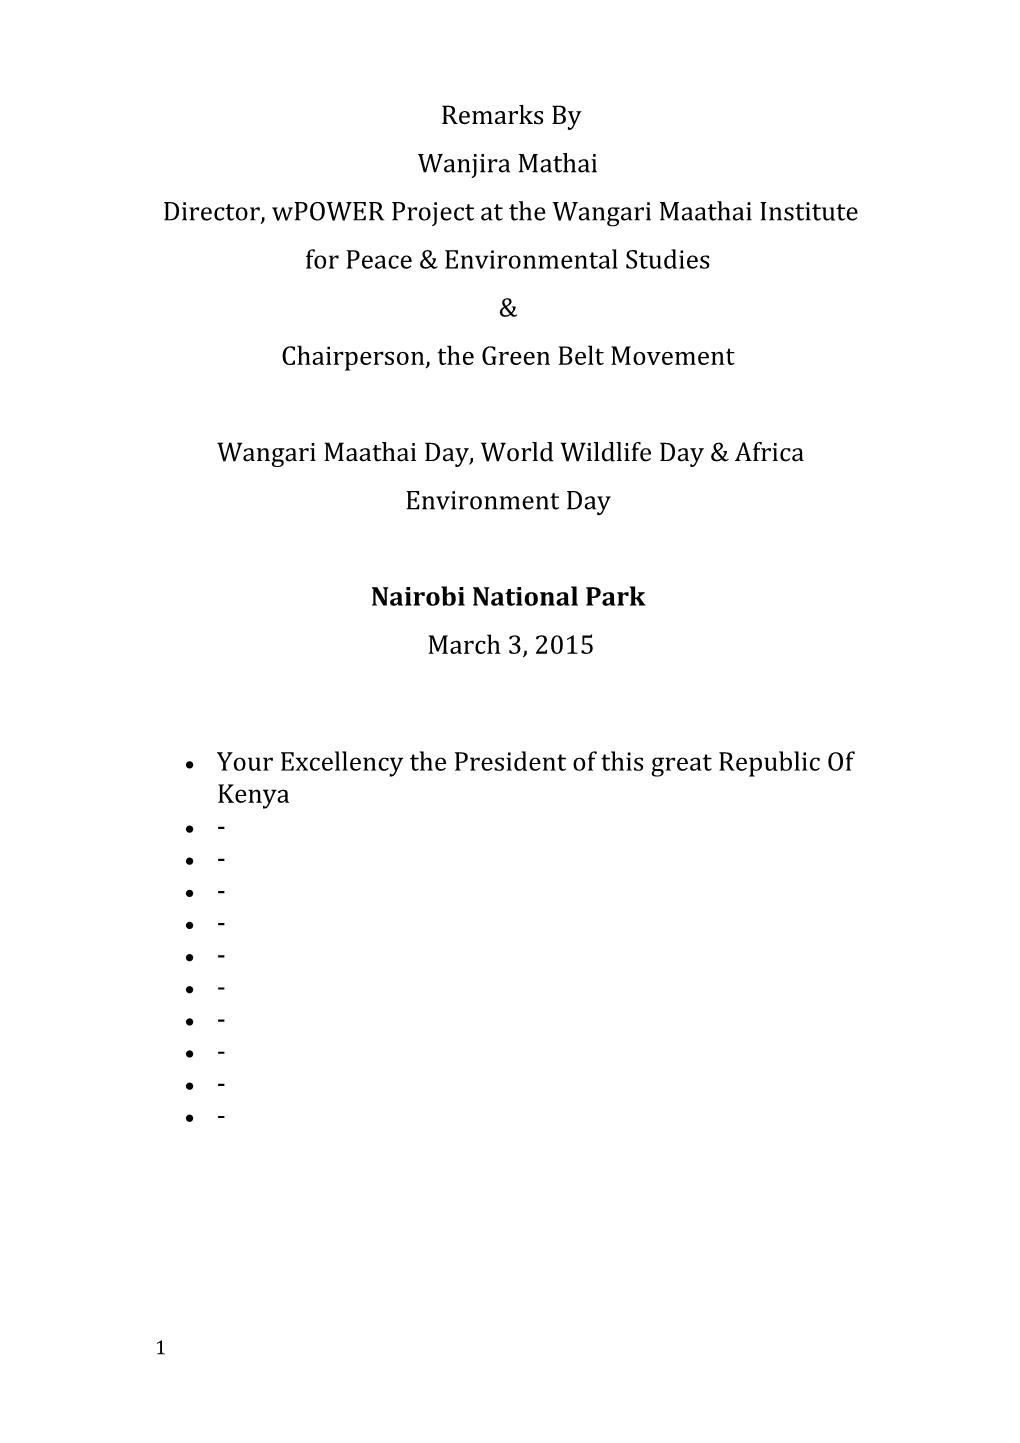 Director, Wpower Project at the Wangarimaathai Institute for Peace & Environmental Studies